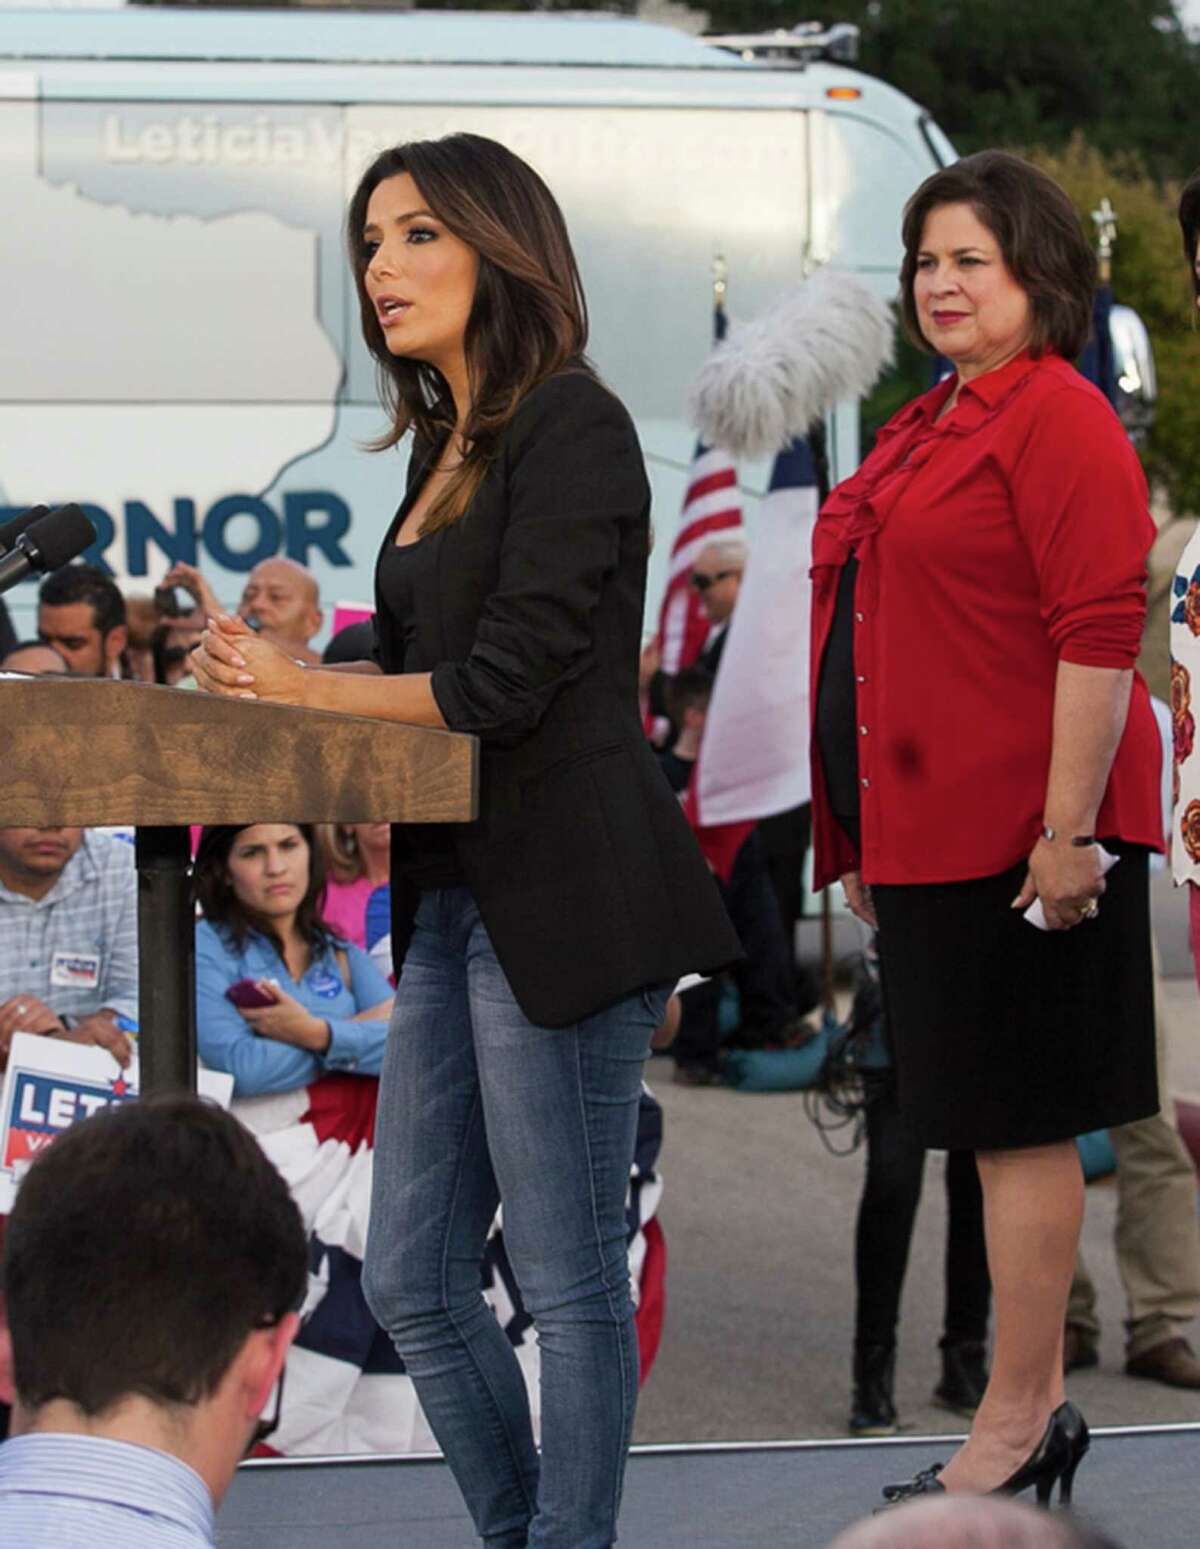 Eva Longoria speaks Wednesday October 22, 2014 during a rally held for Senator Leticia Van de Putte, who is running for Lt. Governor, in San Pedro Park. The rally is launching a statewide "Vote Leticia Tour."